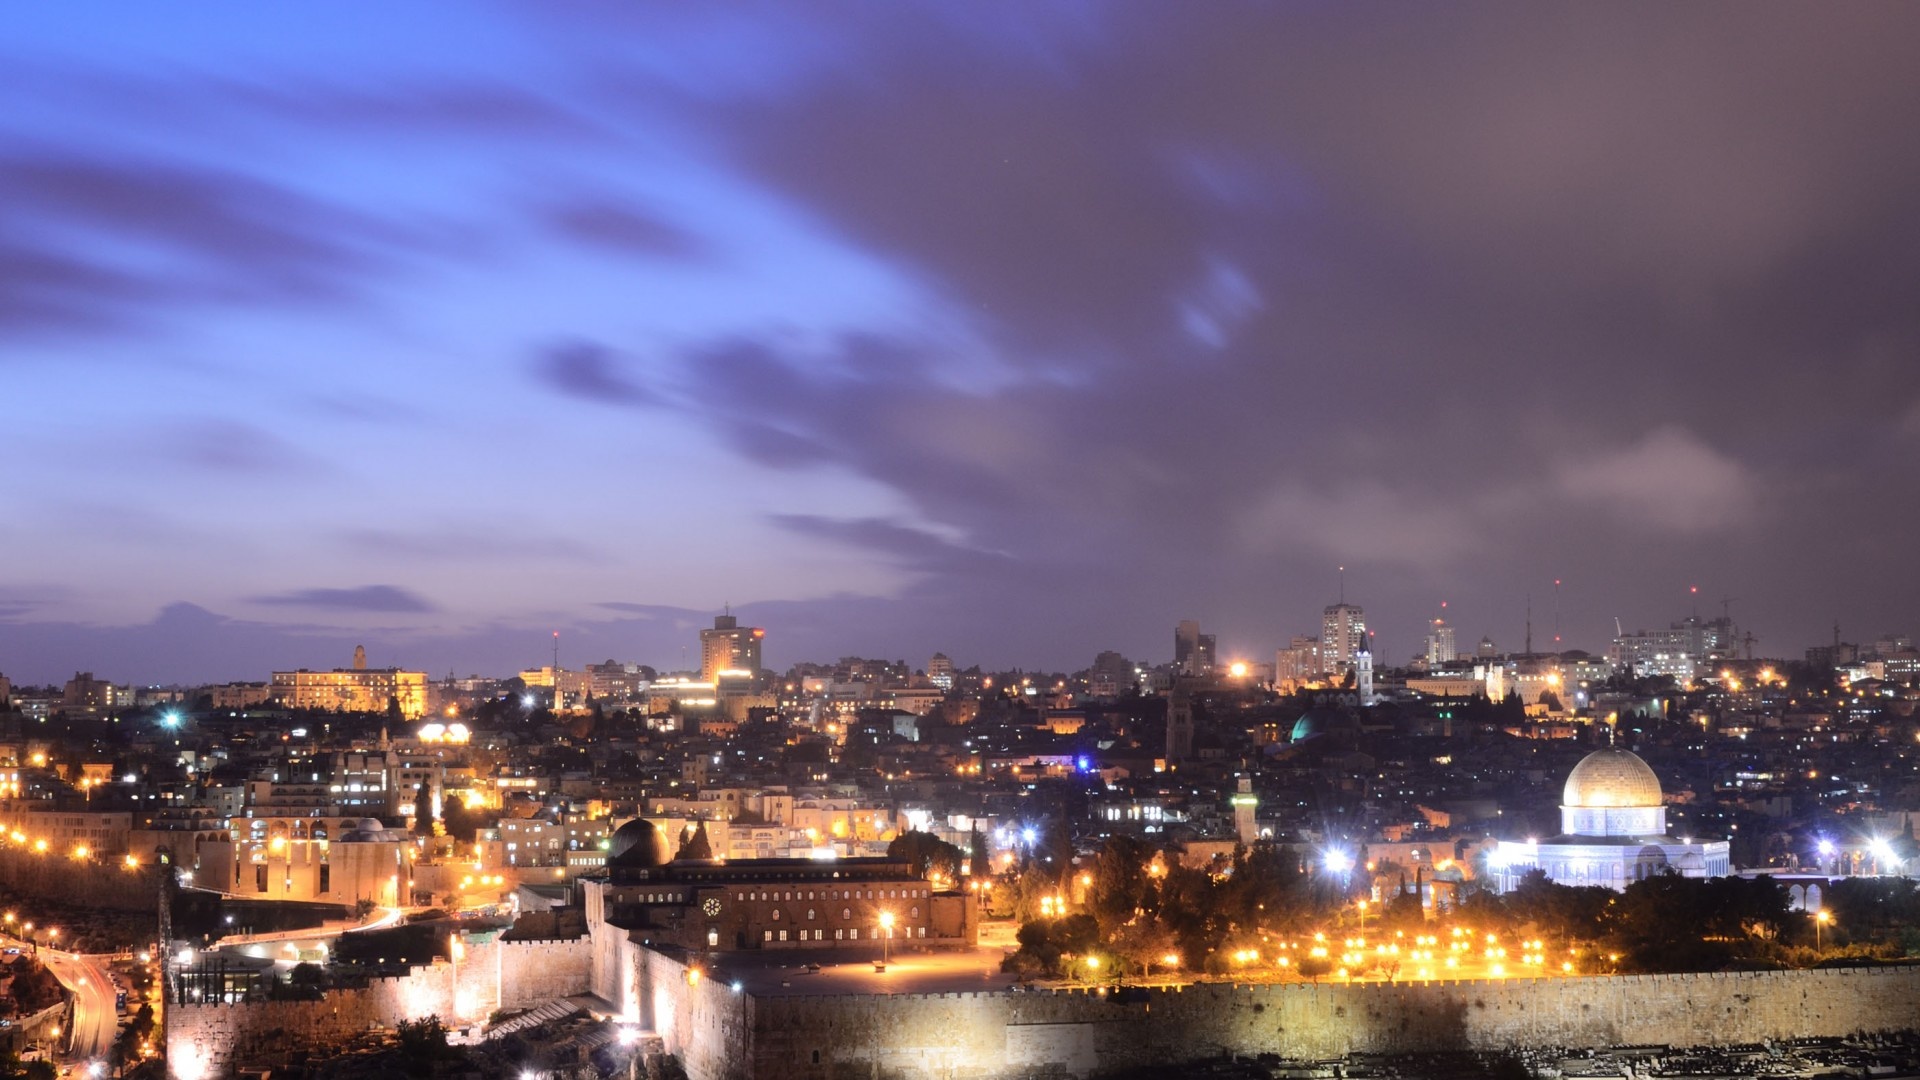 Jerusalem: Claimed as the capital city by both Israelis and Palestinians. 1920x1080 Full HD Background.